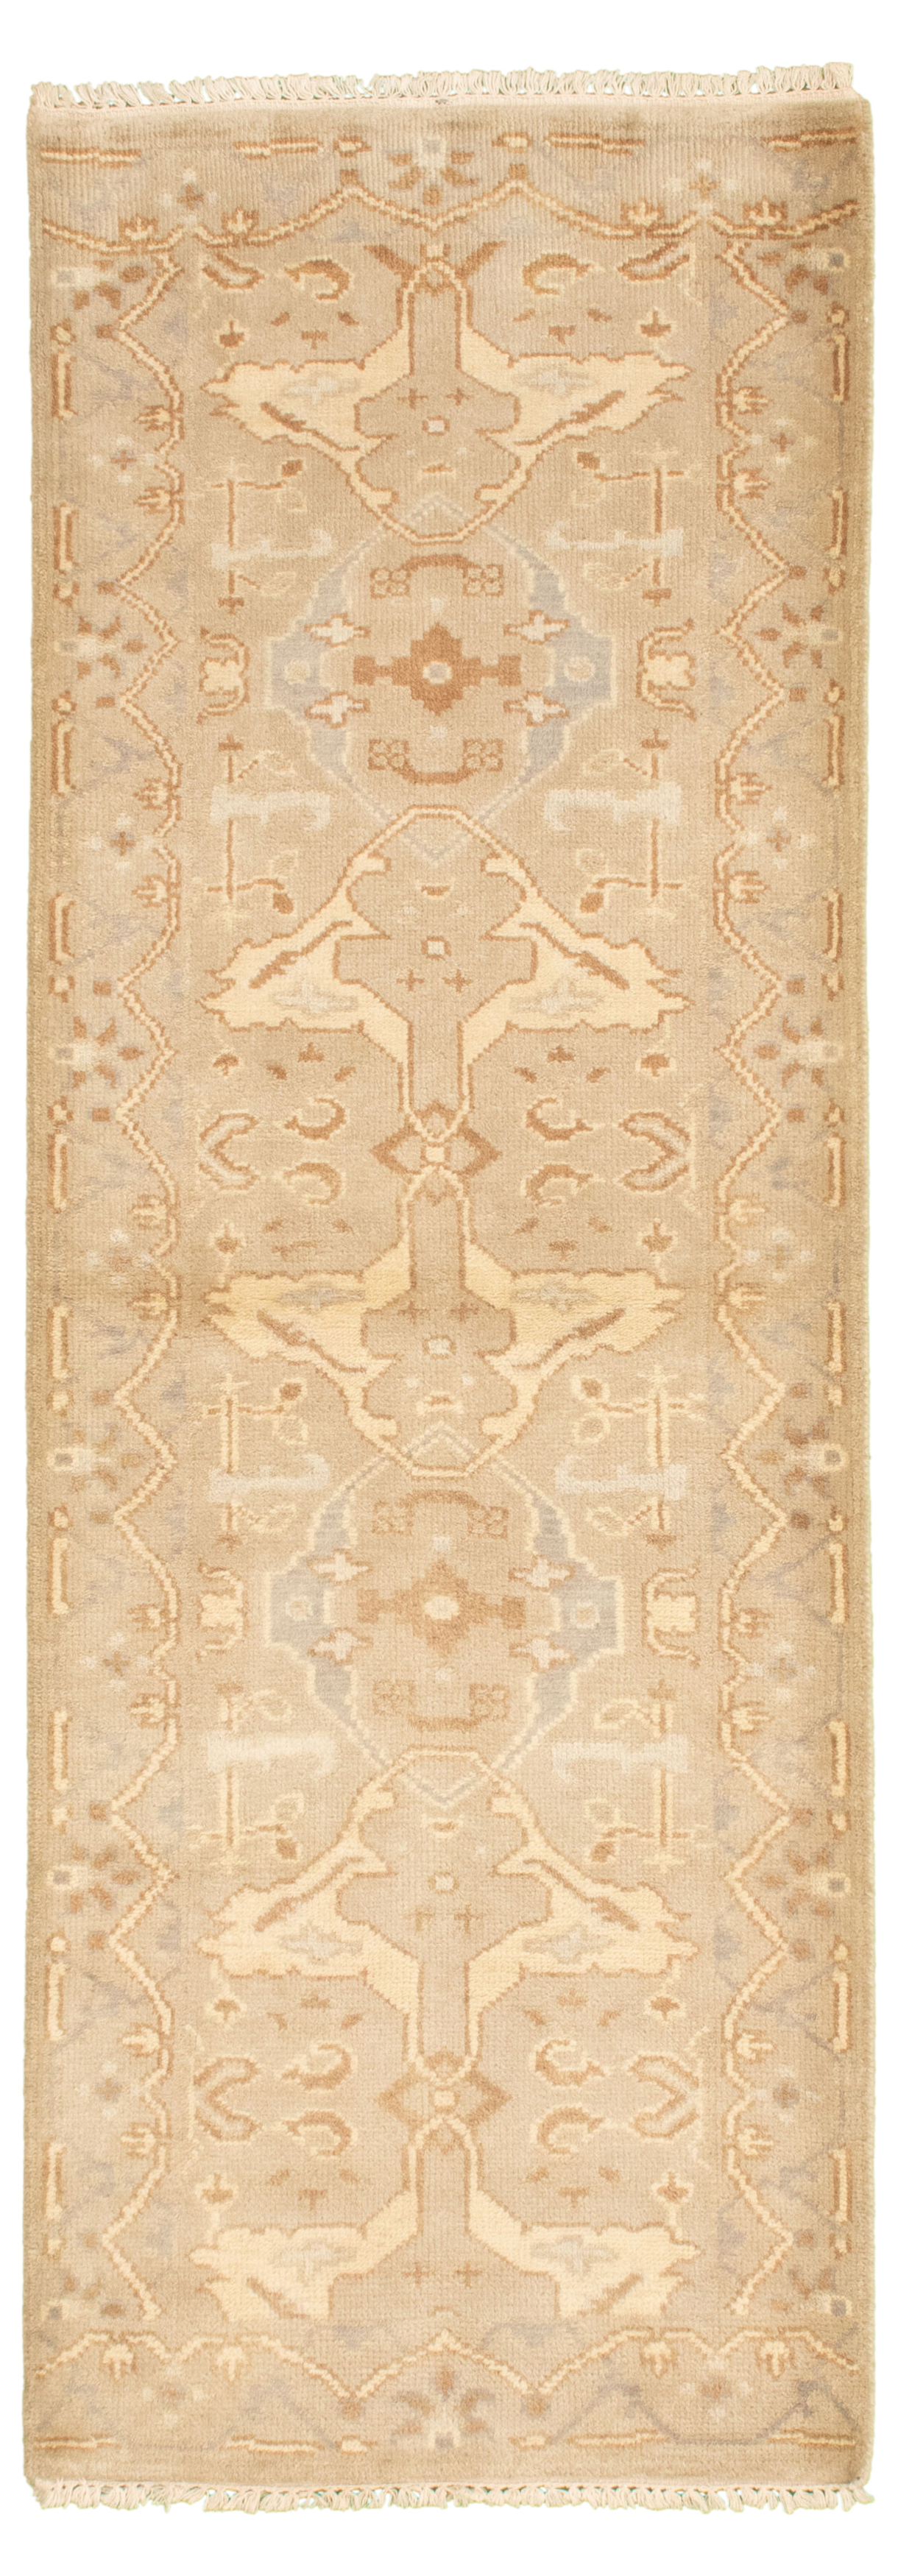 Hand-knotted Royal Ushak Beige Wool Rug 2'7" x 7'11" Size: 2'7" x 7'11"  